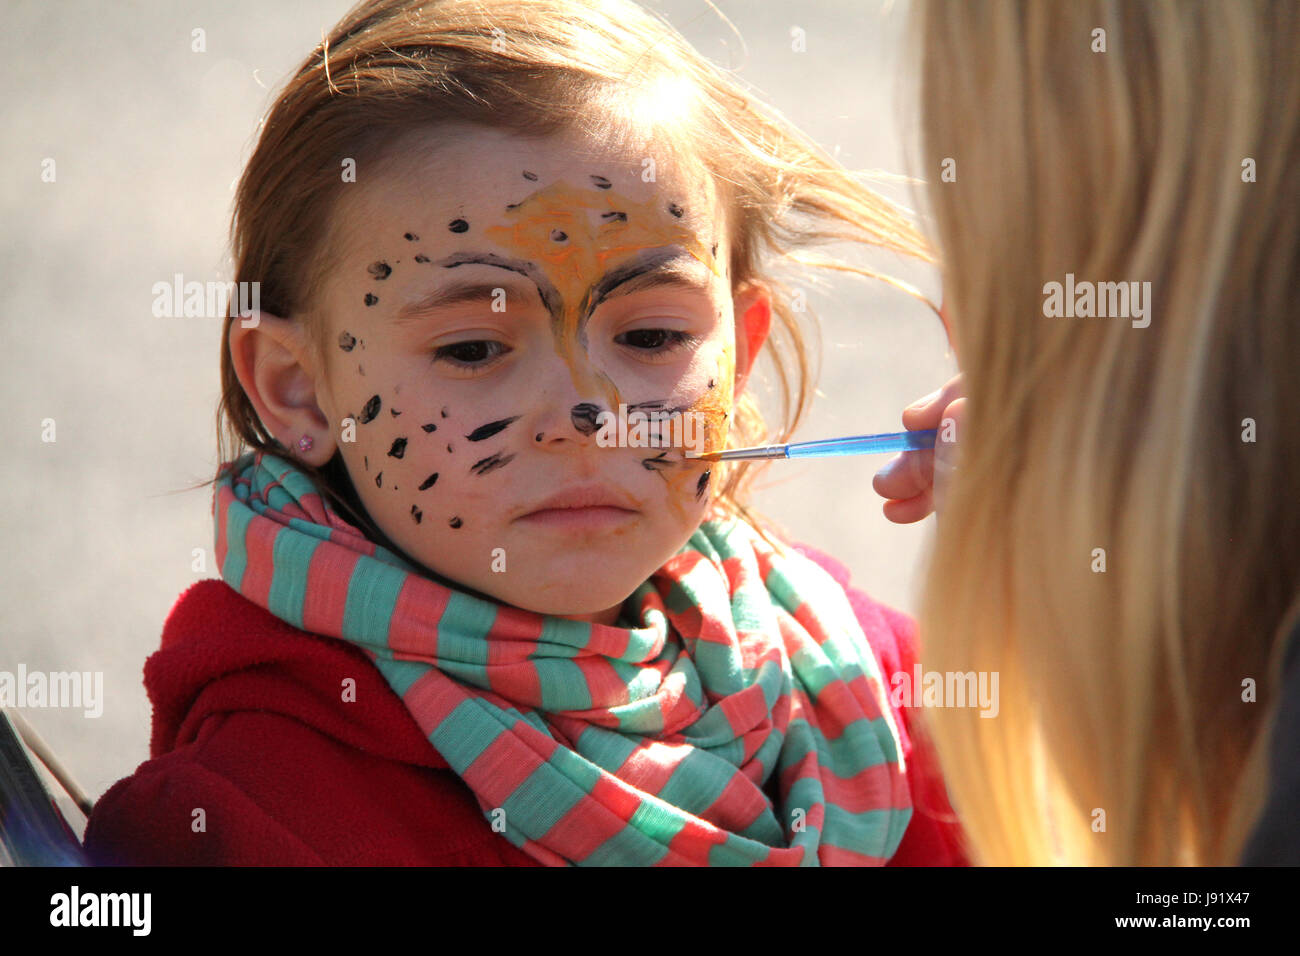 Close up of girl's face during face paint session Stock Photo